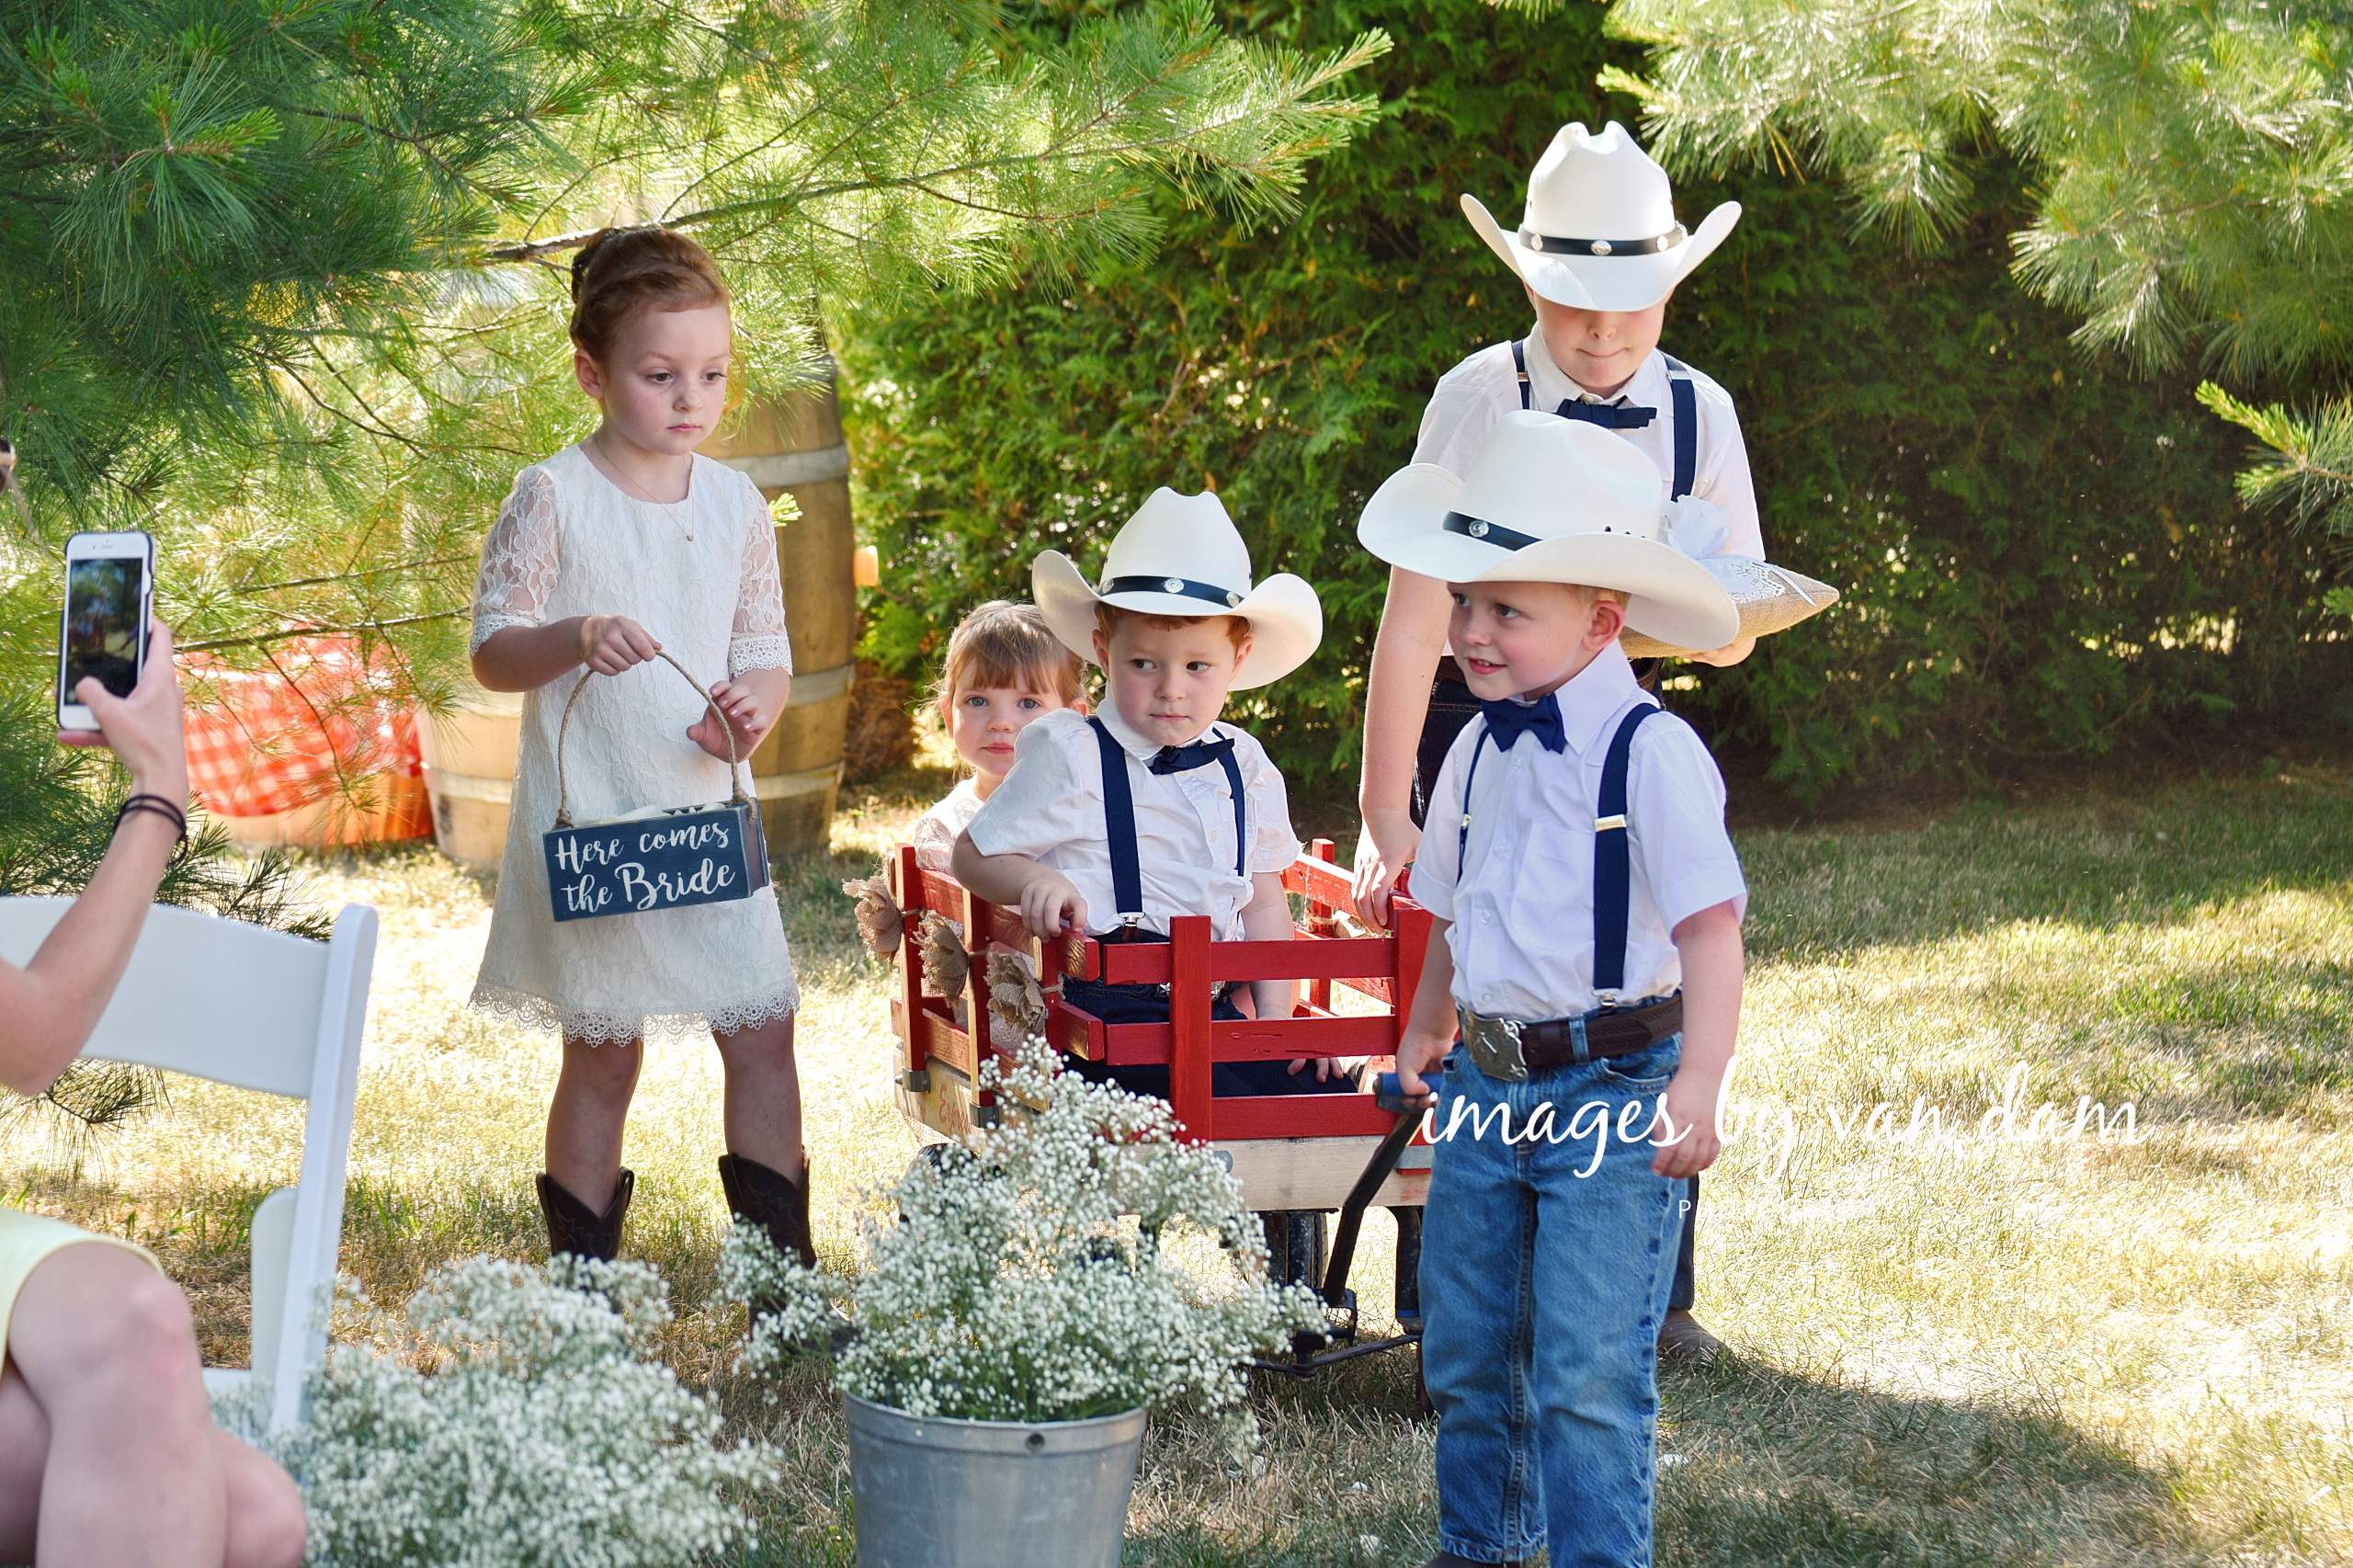 Ring Bearers and Flower Girls Pull Wagon During Processional